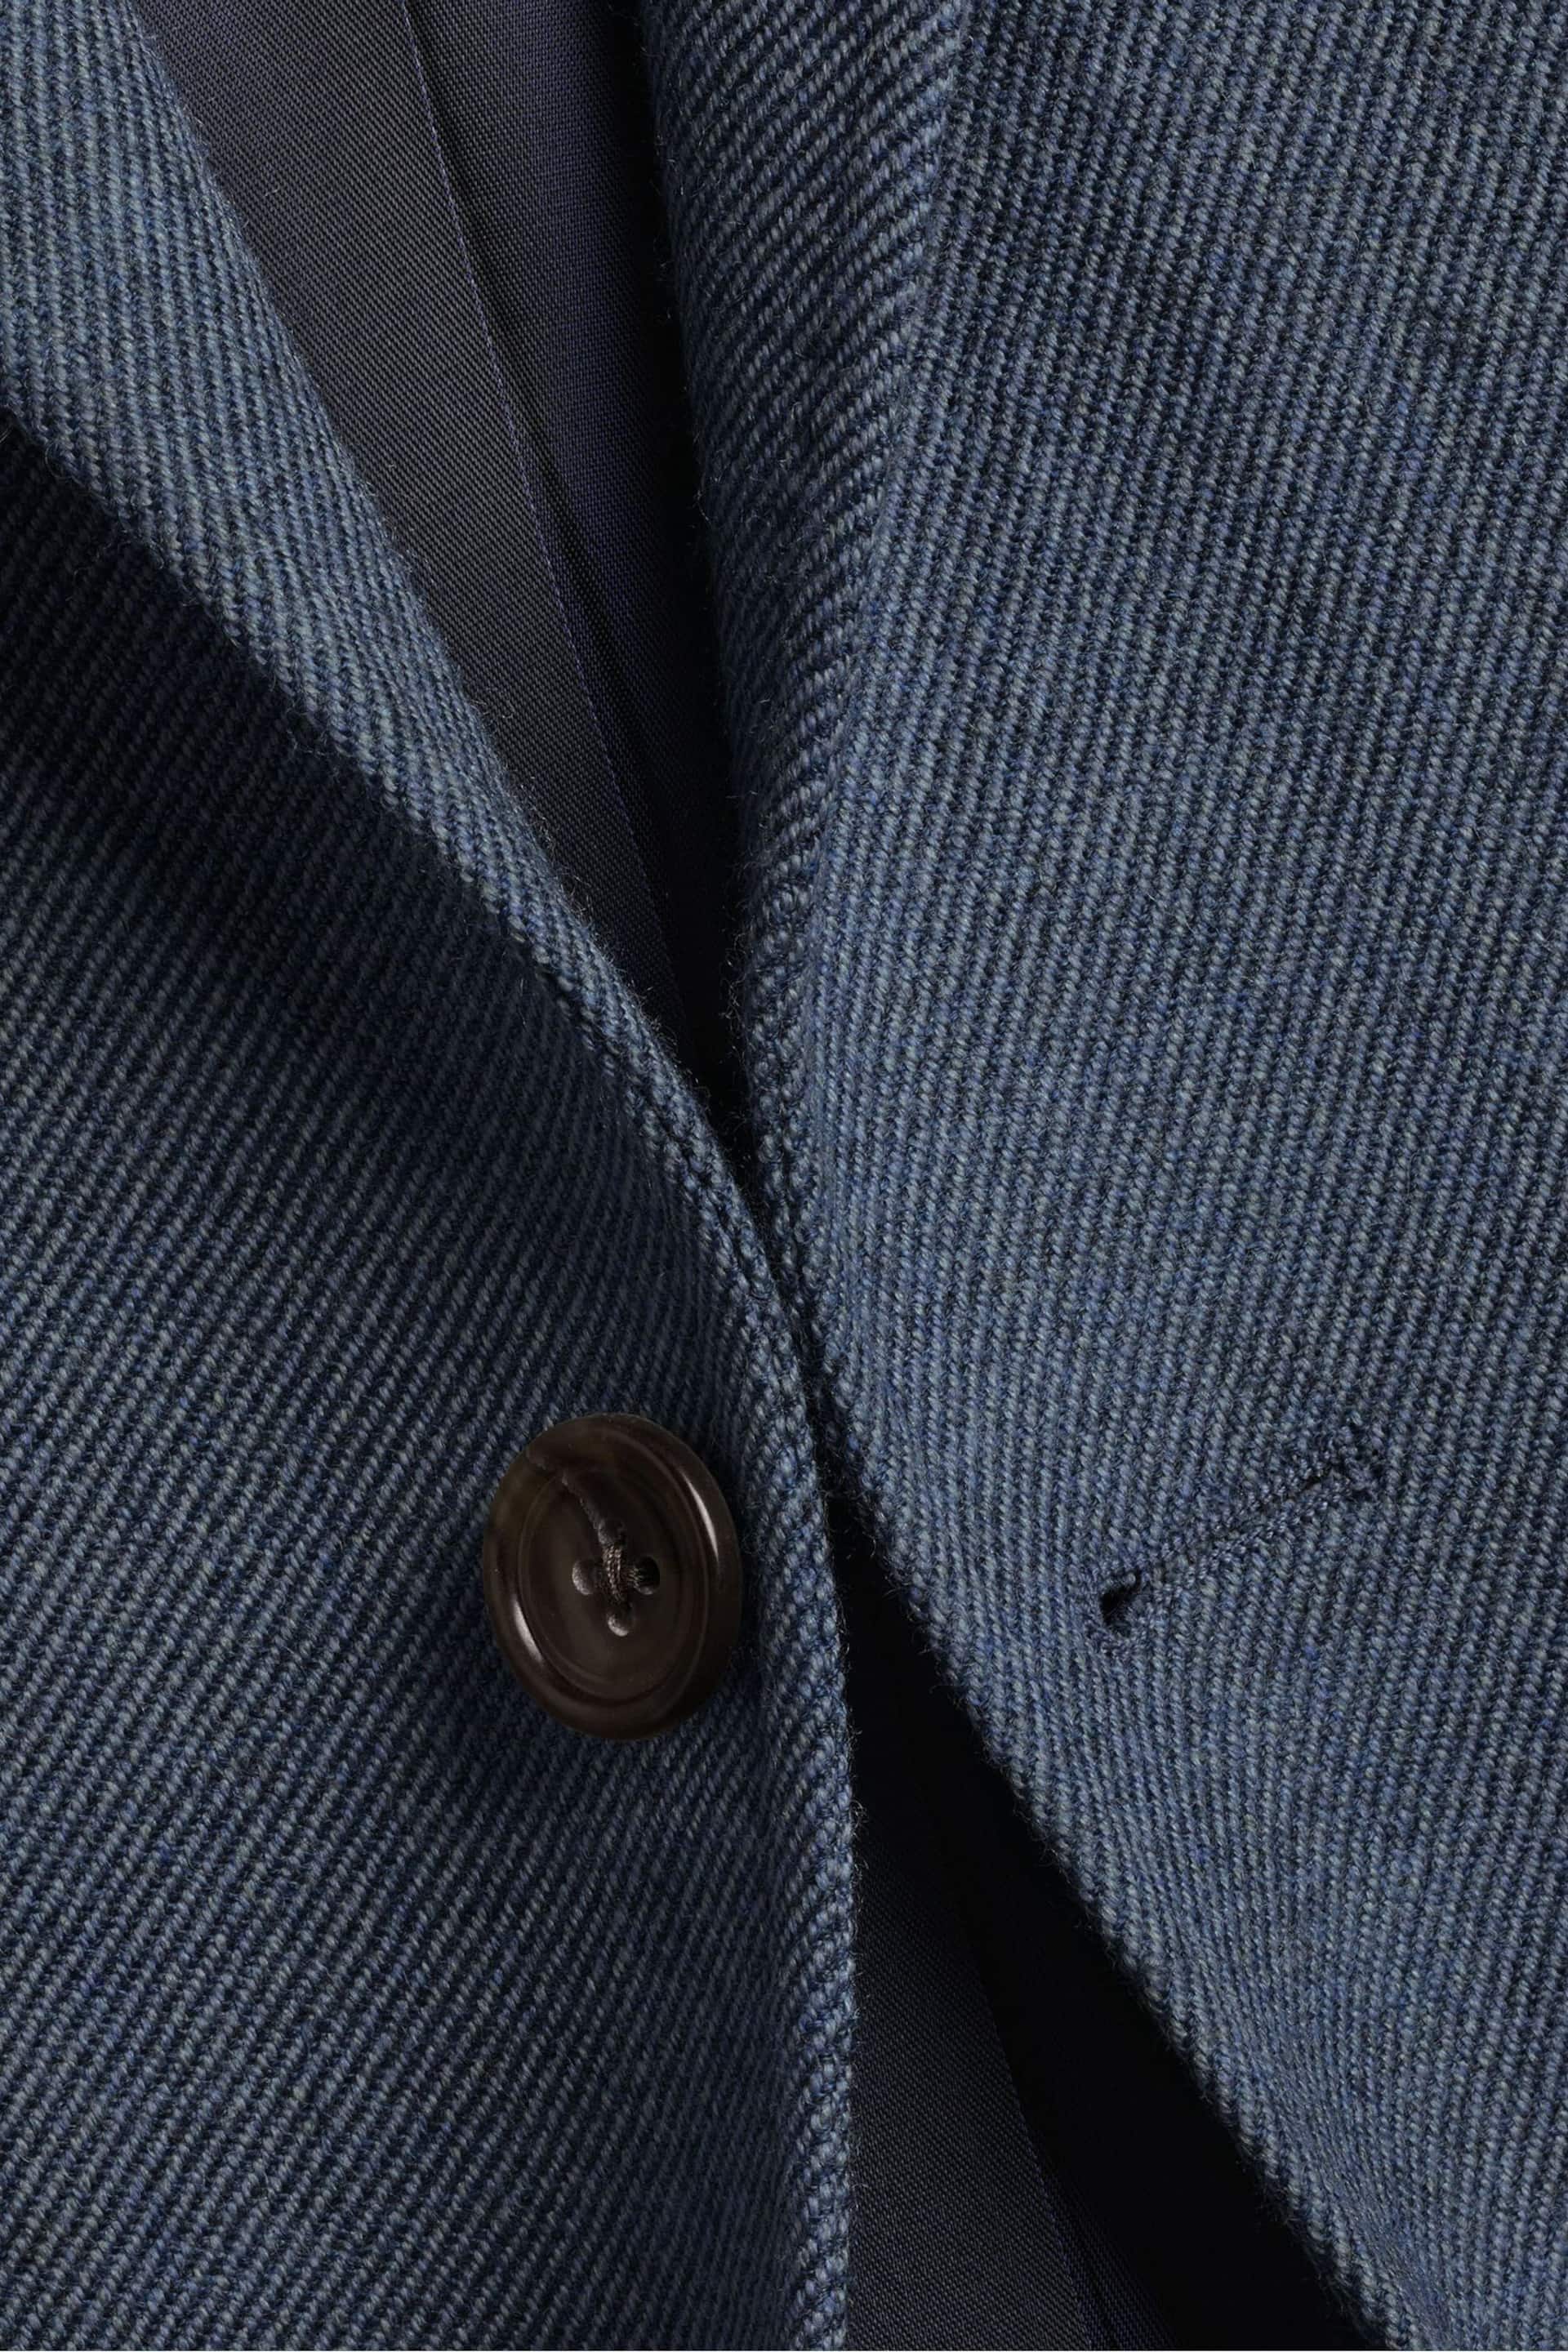 Charles Tyrwhitt Blue Twill Wool Texture Classic Fit Jacket - Image 5 of 5